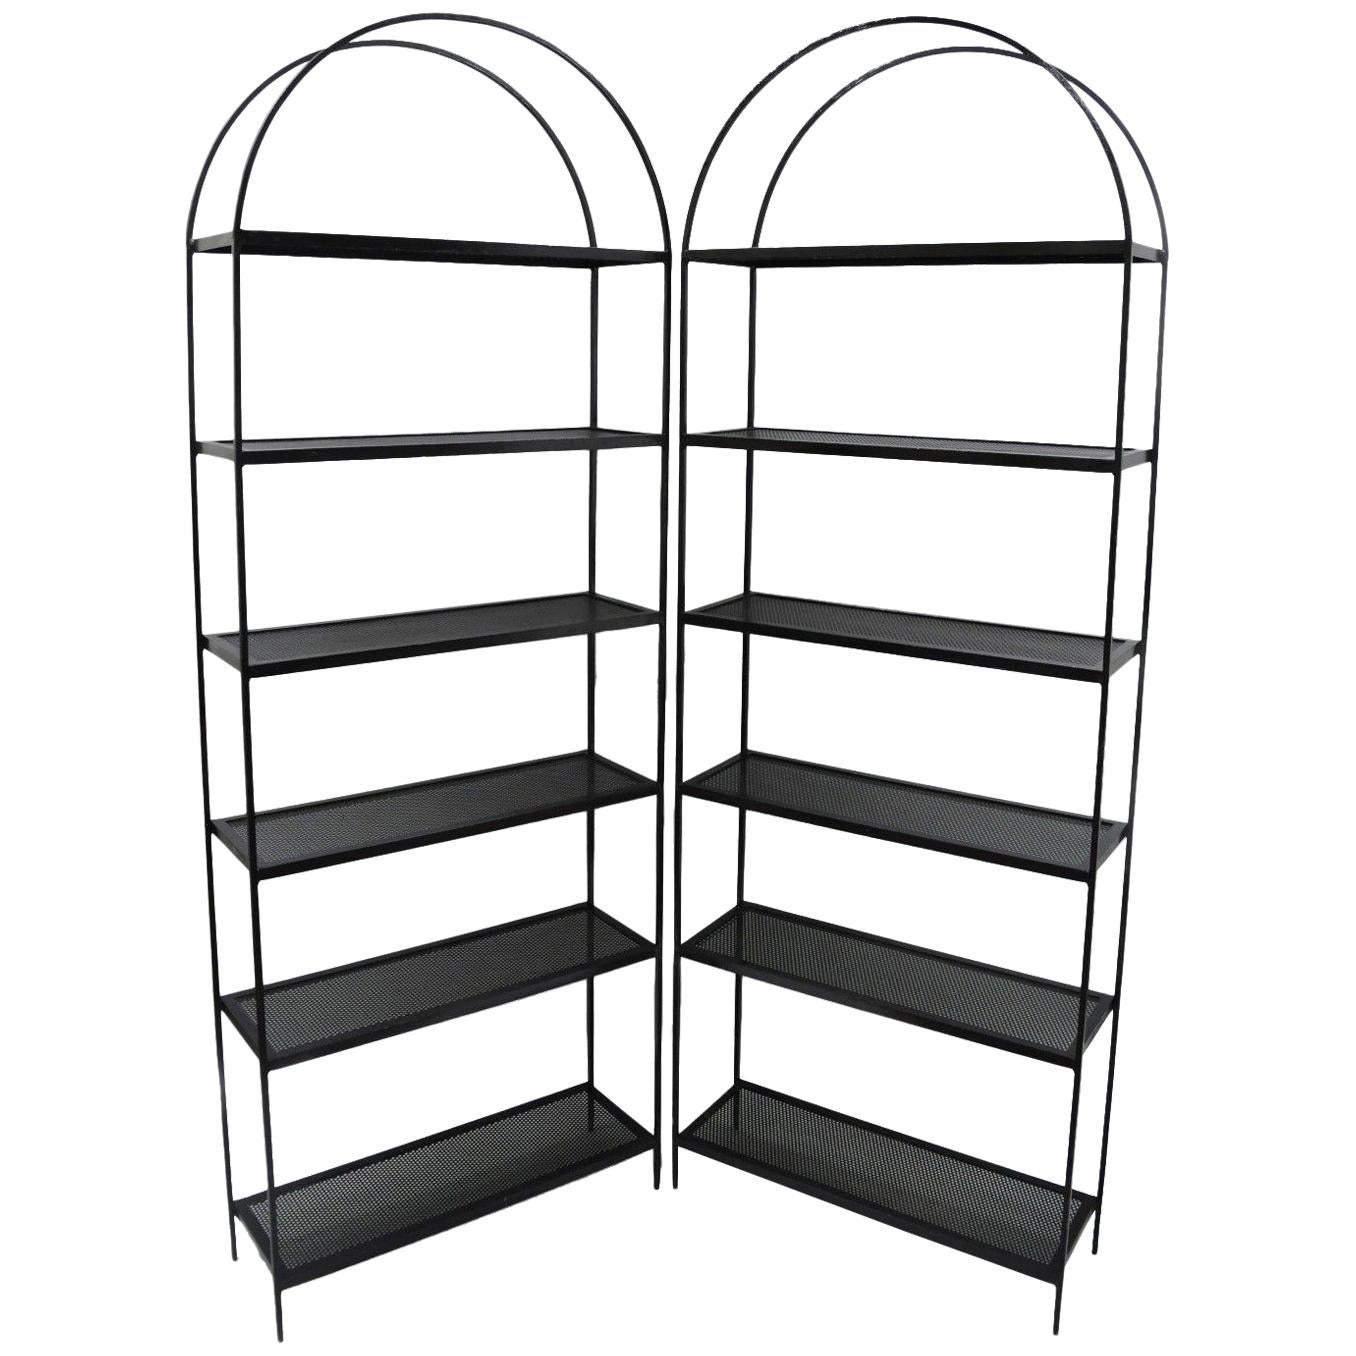 Pair of Tall Arched Iron Mid-Century Modern Bookcase Etagere Mesh Shelves